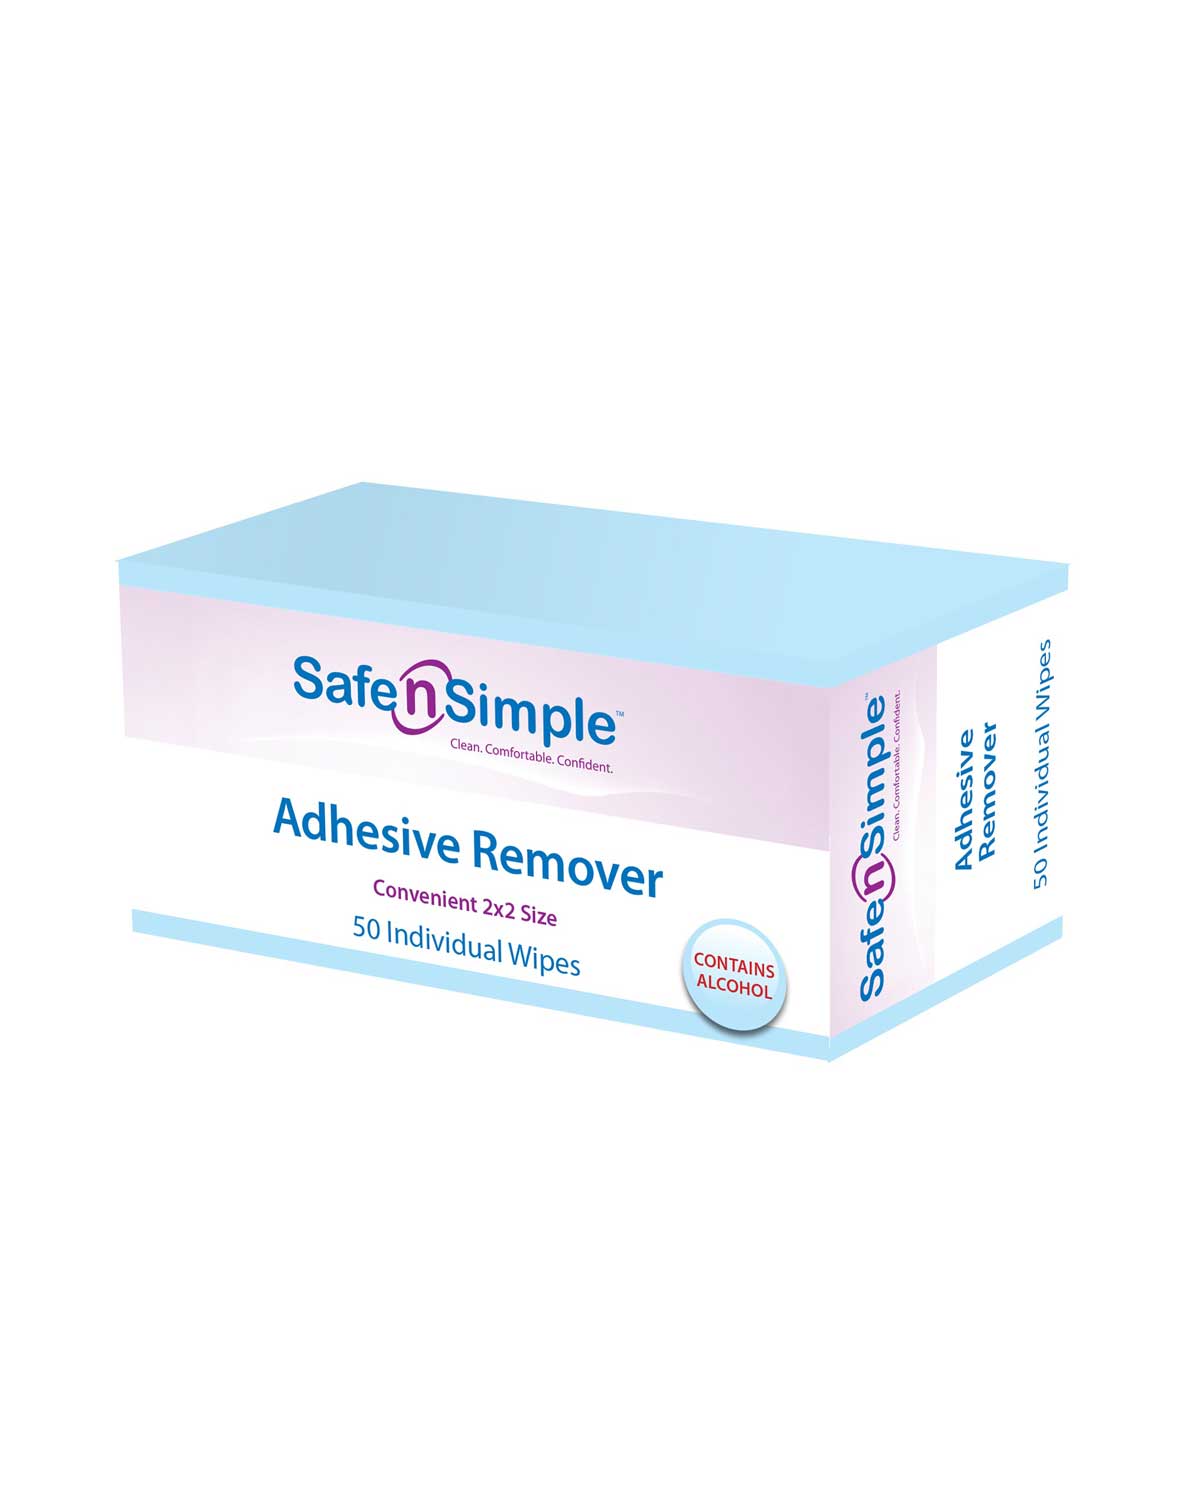 Safe n Simple Adhesive Remover (Alcohol Base) - 50 per box